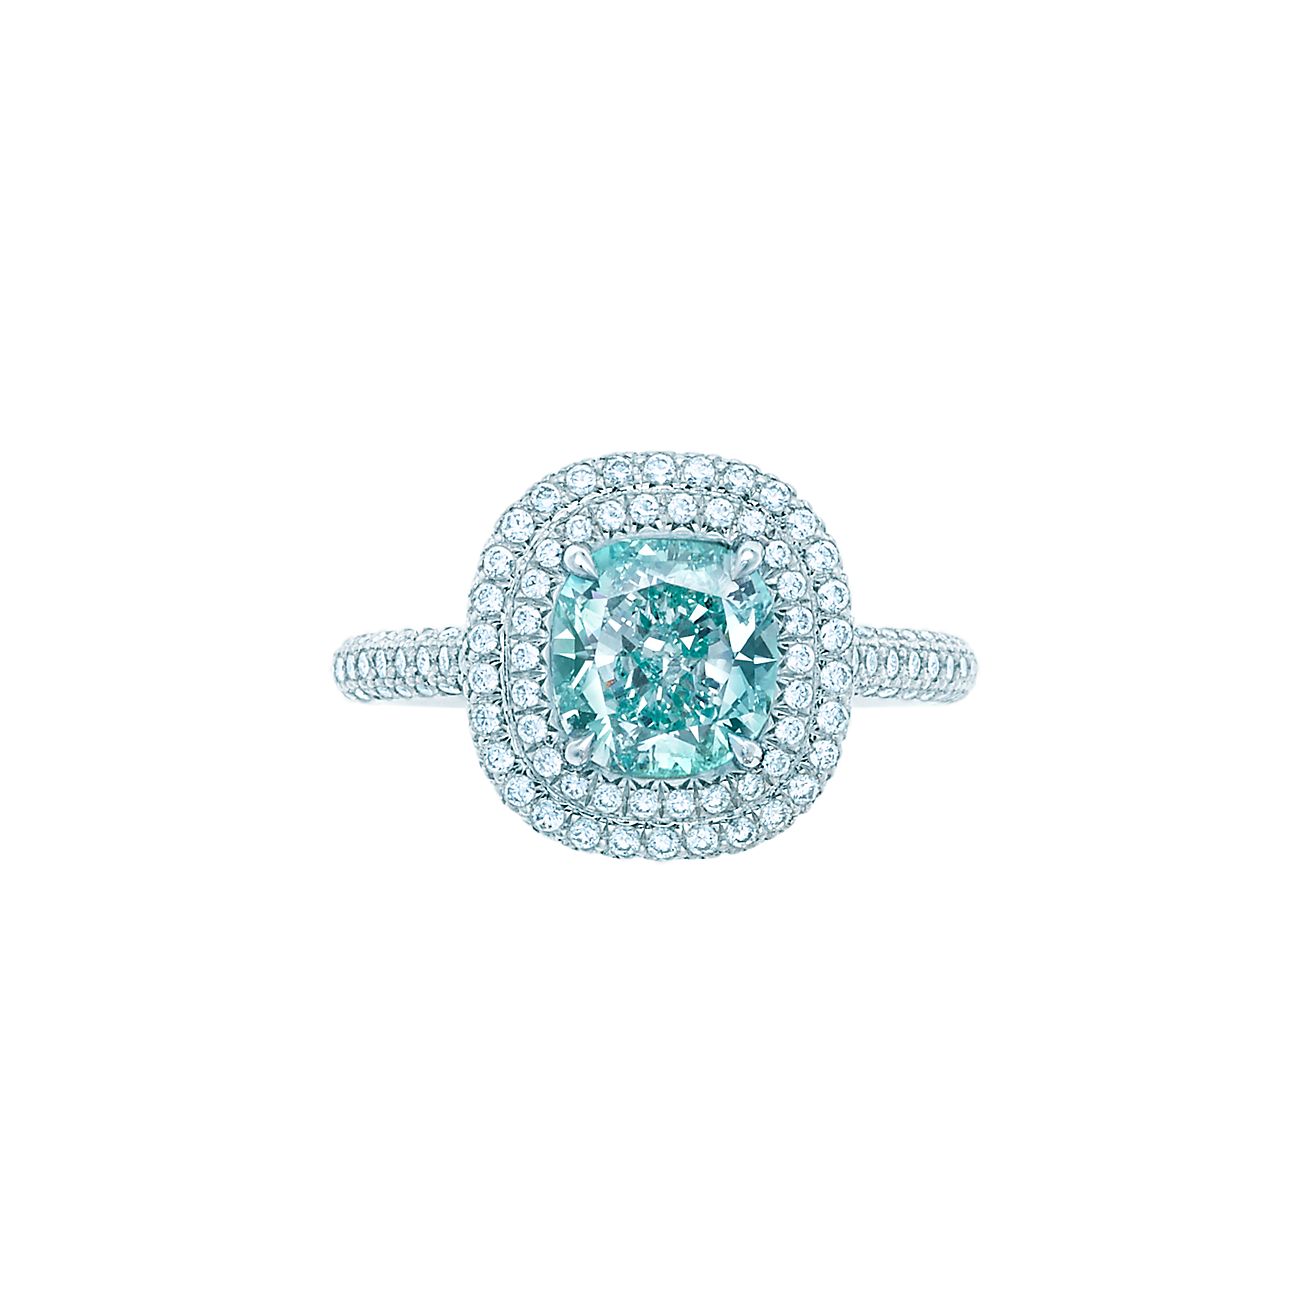 Tiffany Soleste® ring with a 1.66-carat 